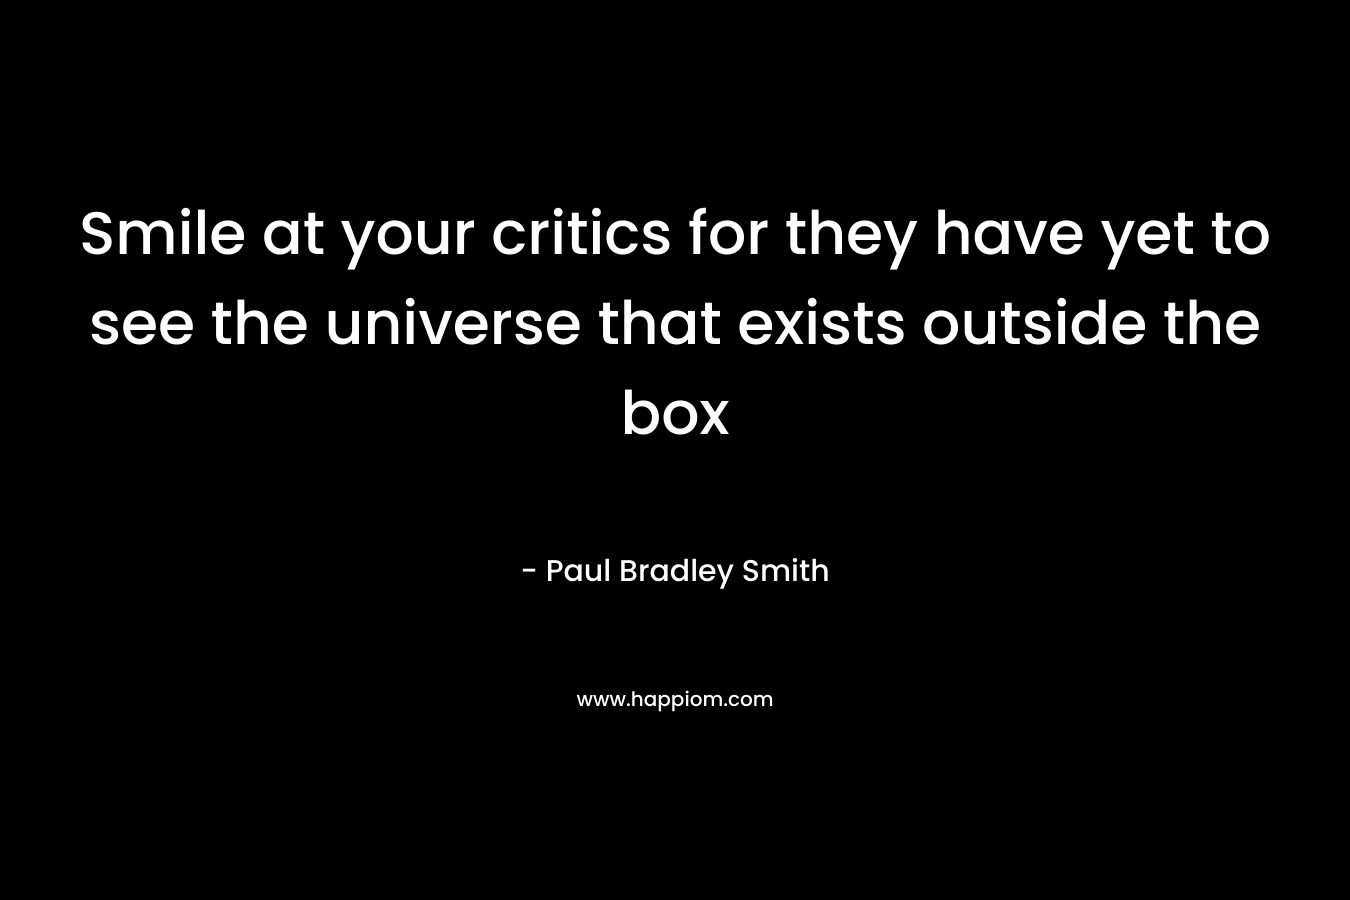 Smile at your critics for they have yet to see the universe that exists outside the box